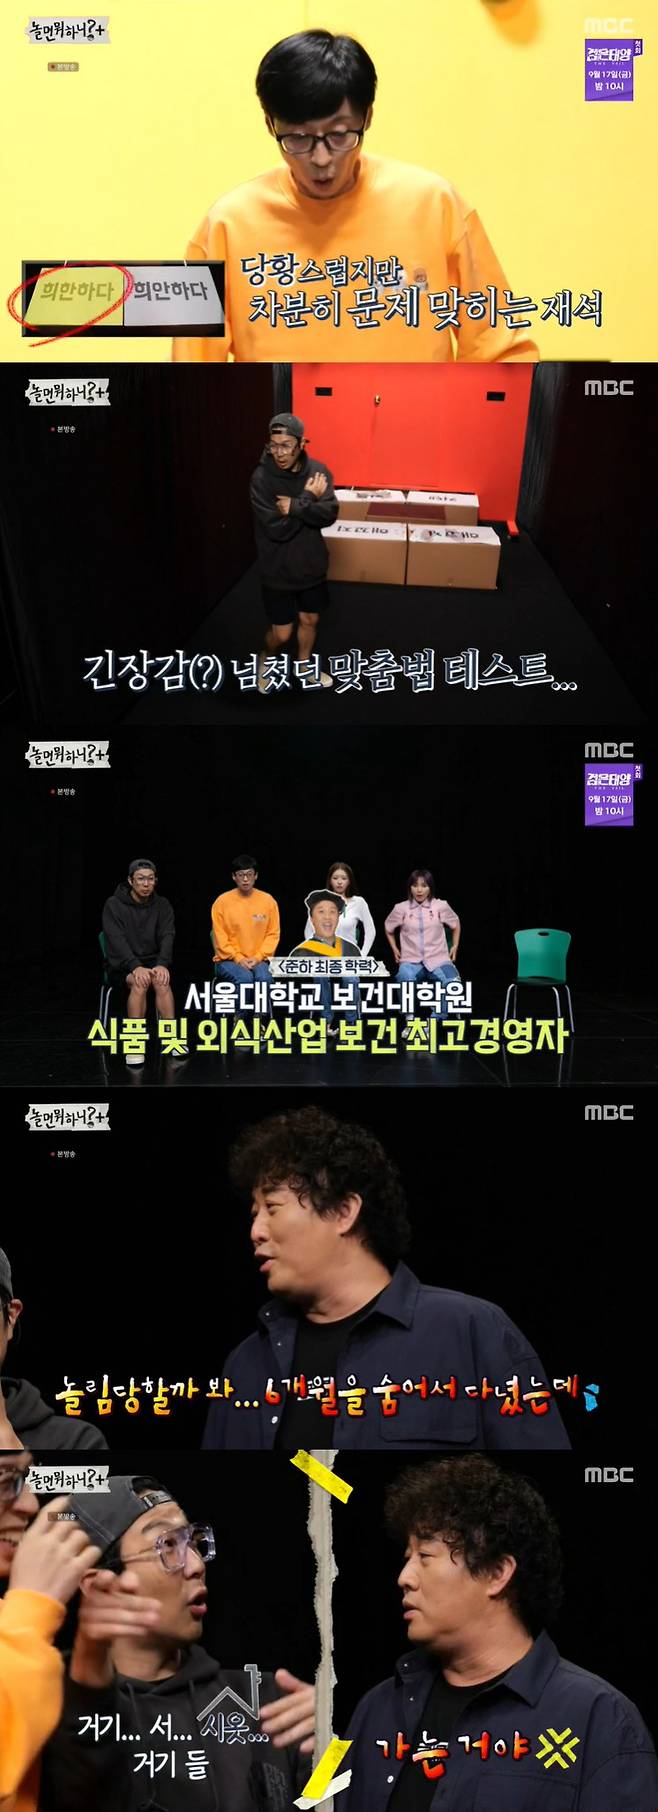 Hangout with Yoo Jin-has anti-war education was revealed.In MBC entertainment program Hangout with Yoo broadcasted on the 4th, Yoo Jae-Suk, Hahas surprise camera was released after the Americas.Haha, who suddenly turned into an MBC anchor, went on the news with a lot of tension.Haha asked the crews because he could not read 200 kwh, but he was panicked because no one informed him.Haha, who barely passed the crisis, even apologized for saying sorry.The crew put a difficult number in the script to further embarrass Haha, and kept calling Haha to make the bell ring.In front of Haha, who had barely read the script, Shin Bong-sun was on the news of the stock market. Shin Bong-sun was a little overwhelmed, but finished the news smoothly.After the show, they even cried at the thought of making a mistake on live broadcasts, and Haha confessed, Im so sorry, but it was good that you were ruined. It was comforting.Yoo Jae-Suk, the Americas, drove Your News Comment Settai No and Haha noticed that it was a surprise camera looking for an article; Haha said, The bar was out.The news is Settai, Shin Bong-sun said, I almost felt better playing at home when I was so abusive.Soon Shin Bong-sun was also told that it was a surprise camera and relieved, he got back to laughing at the saying that there was the next scapegoat.The next scapegoat was Jeong Jun-ha, who was stunned by the sudden news input and began live broadcasts full of tension.Jeong Jun-ha, whose soul was out of the picture, started the news with a moist eye and laughed.The production team put a handkerchief buried in black gin-ha secretly, and Jin-ha continued to broadcast with black gin on his face.Jeong Jun-ha, who was hurried to face the announcer Jung Dae-hee, prepared a closing Re-Ment with a face full of water.Among the closing Re-Ment, Jung Dae-hee announcer suddenly asked Jeong Jun-ha to show her new song A Shrimp choreography, and Jeong Jun-ha performed an instant live stage.Jeong Jun-ha, who saw his face after the news, was surprised to say, I made my face a beggar.Yoo Jae-Suk and Haha hit Settai, saying, My brother is out now. Jeong Jun-ha said, Do you do this next week?In front of Yoo Jae-Suk, which opened the door to the question, a sort test was waiting; Haha, Shin Bong-sun, and the Americas also came through the door, performing a series of orthography tests.The following test participants are Jeong Jun-ha.Kim Tae-ho PD told Yoo Jae-Suk that he was from Seoul National University, and Yoo Jae-Suk said, Seoul National University Graduate School of Health Food and Food Industry Health CEO.I also won a sommelier course for six people a year, and it was the number one member of the IQ. High-educated Jin-ha was eliminated from the first stage and comforted the members.Yoo Jae-Suk teased him as from the School of Health at Seoul National University as soon as Jeong Jun-ha appeared, and Jeong Jun-ha said, I hid for six months because I was afraid I would be teased.Haha asked, Do you listen to the Internet class or go directly? And Jeong Jun-ha said, Going, taking classes.The supervision quiz followed by the progress of Yoo Jae-Suk, who took the top spot in the spelling test.Jin-ha was ranked 5th in elementary school and 15th in middle school, and dreamed of going to medical school.Yoo Jae-Suk laughed at Jeong Jun-ha, saying he catched a skewer instead of a scalpel.Then, during the introduction of Shin Bong-sun, childhood photos were released.Shin Bong-suns photo devastated everyone and Shin Bong-sun appealed, I did not have double eyelid surgery, but I can not see the picture in high school.Shin Bong-sun, who was called Shinmina until he was seven, said, After becoming Bongseon, I suddenly started to gain weight.